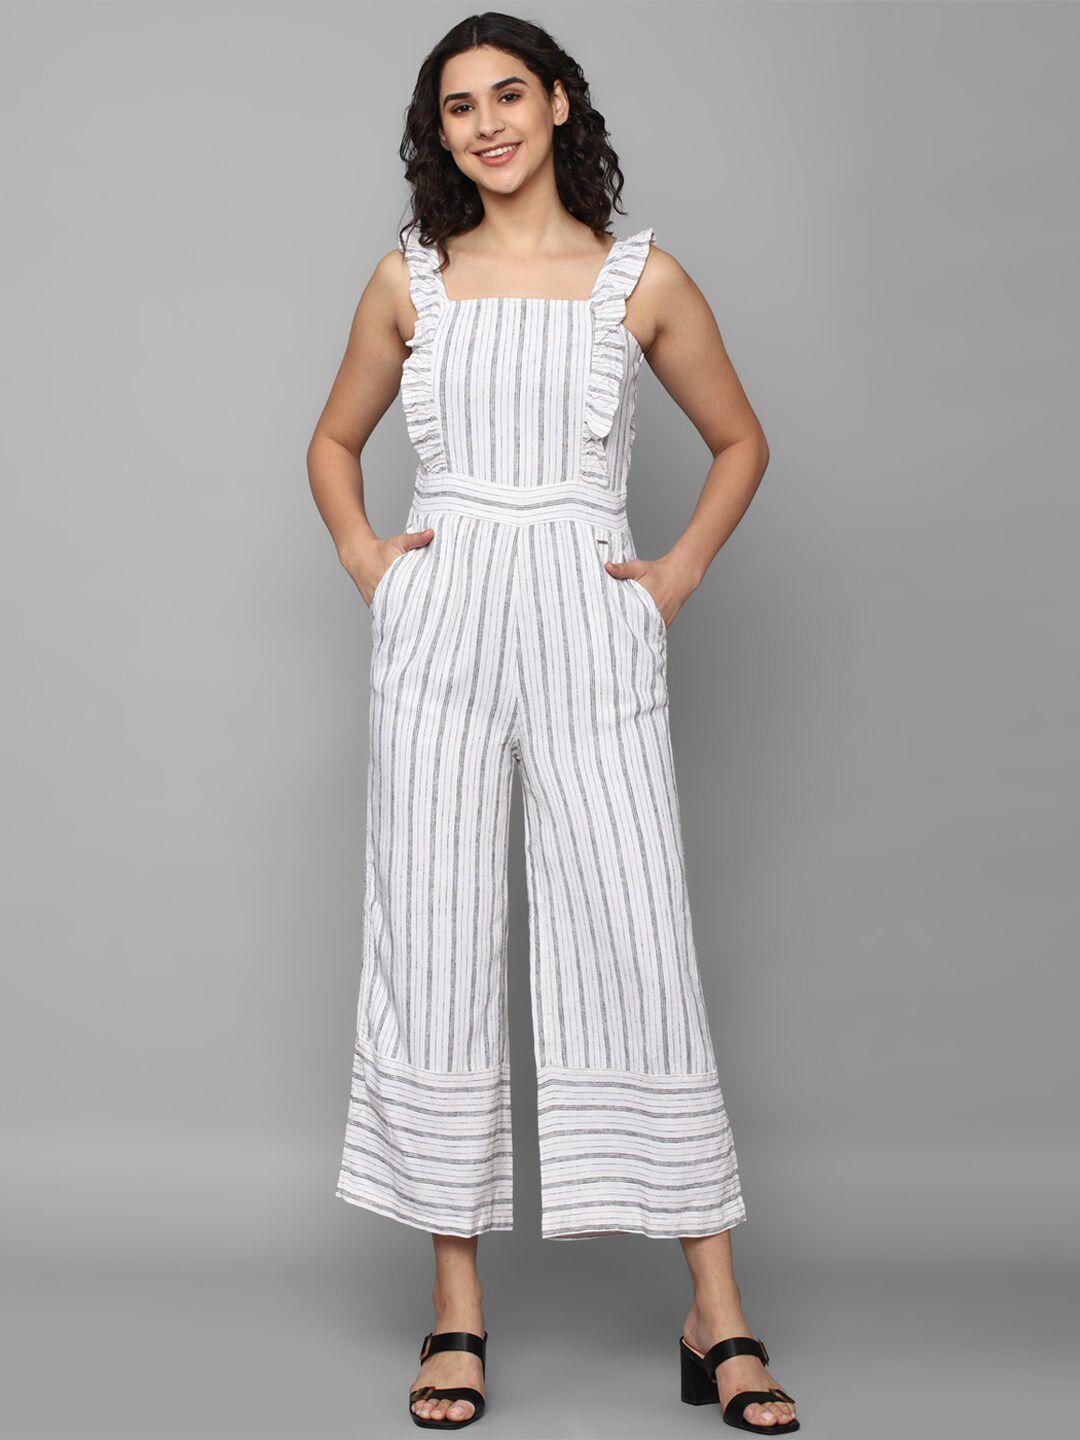 allen solly woman striped linen basic jumpsuit with ruffles